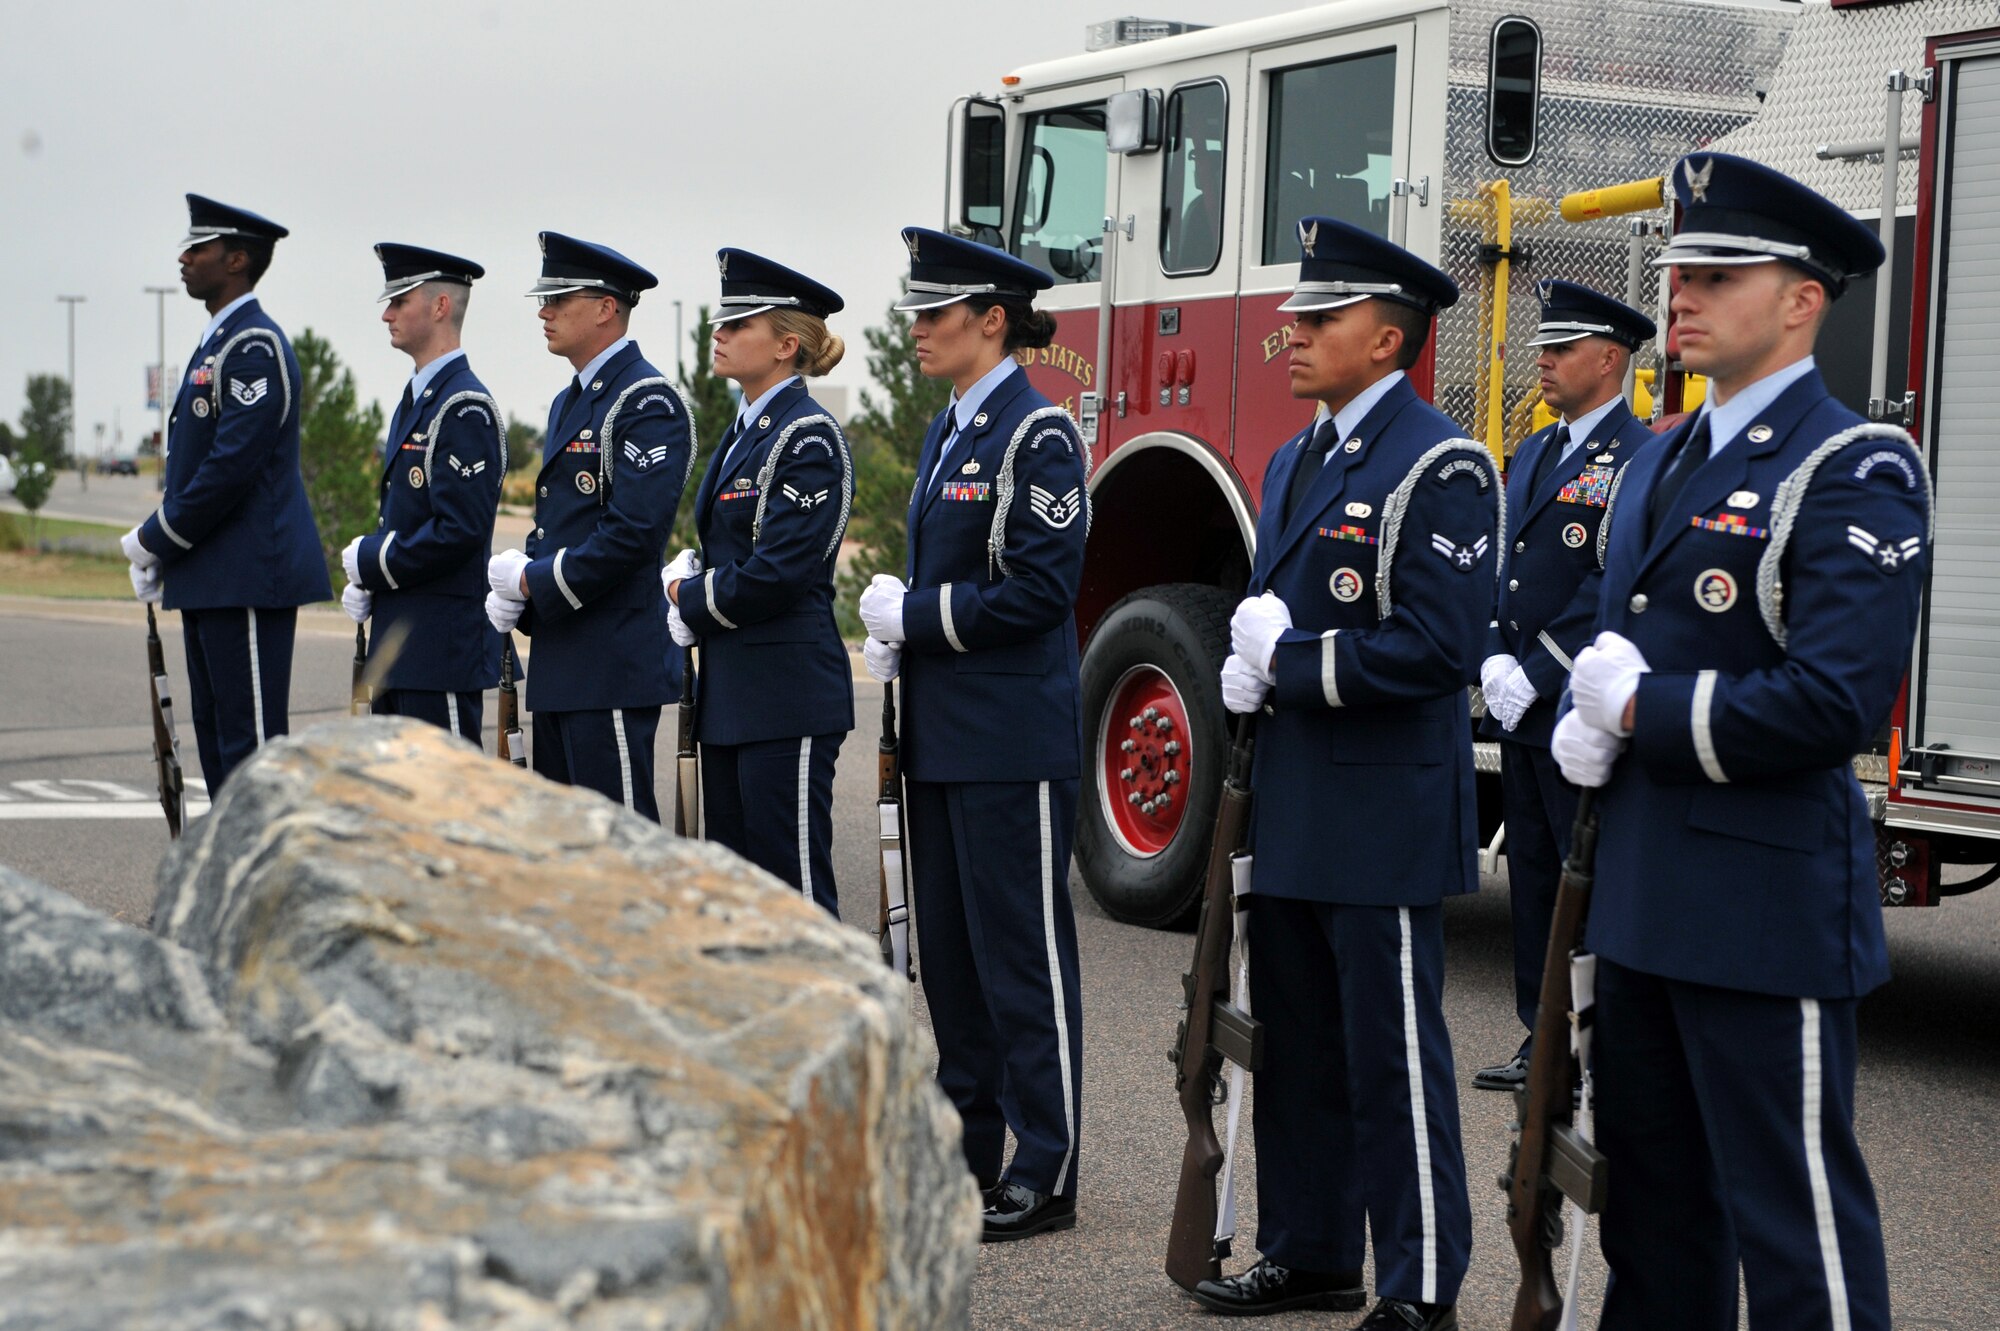 The Mile High Honor Guard stands in honor of the victims and fallen heroes of 9/11 during the Patriot Day retreat ceremony Sept. 11, 2014, on Buckley Air Force Base, Colo. Patriot Day is the national day of service and remembrance, in memory of the thousands killed on U.S. soil in the 9/11 attacks. (U.S. Air Force Photo by Airman Emily E. Amyotte/Released)